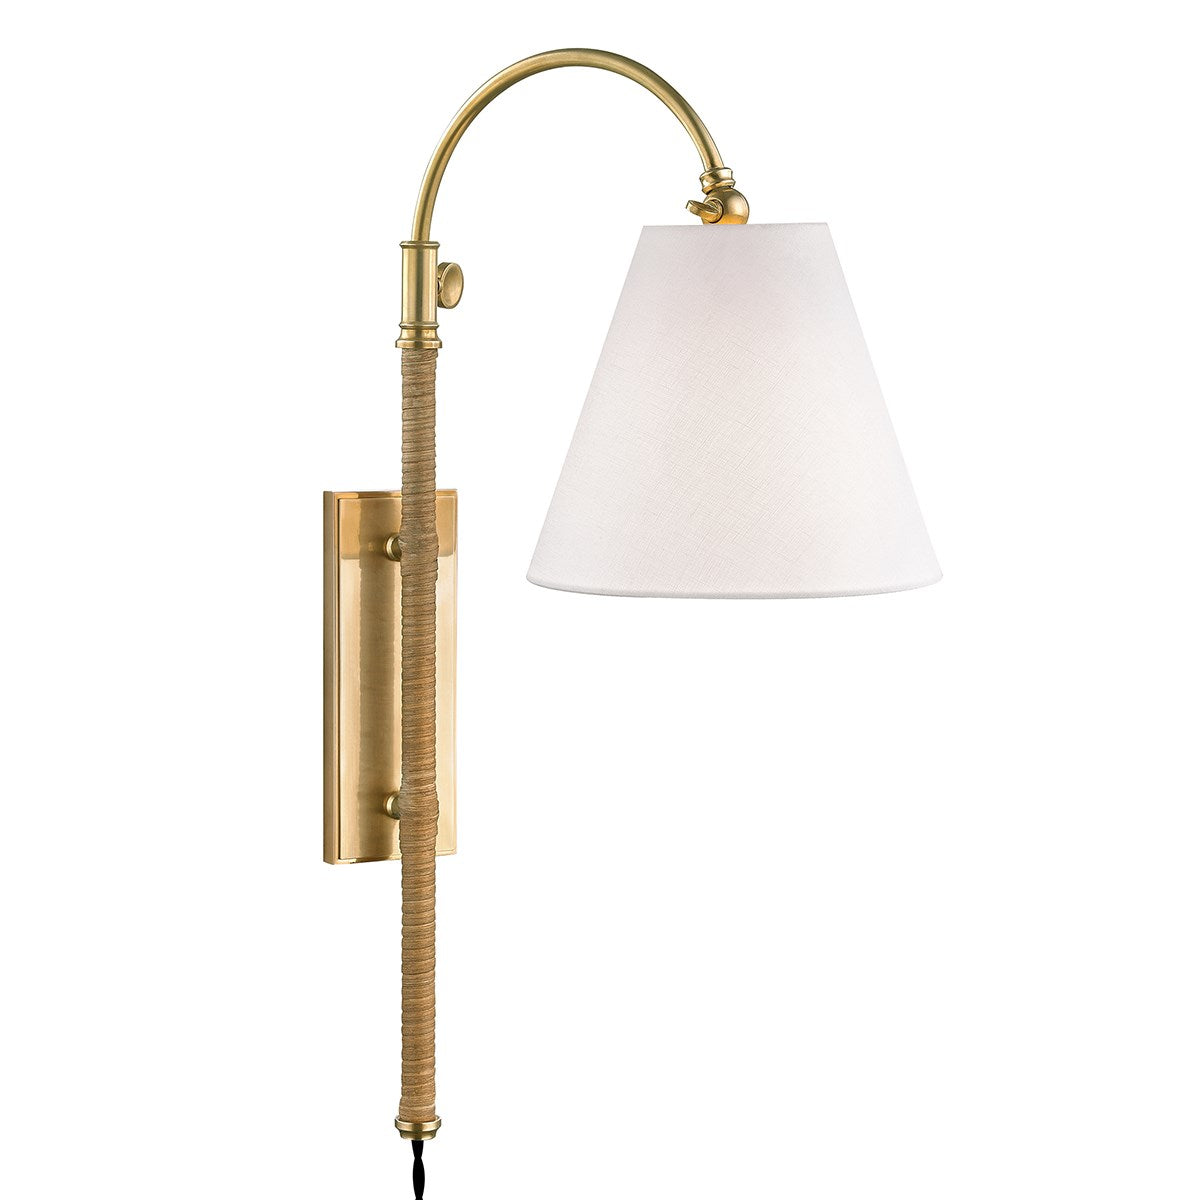 Curves No.1 - 1 LIGHT ADJUSTABLE WALL SCONCE W/ RATTAN ACCENT Wall Light Fixtures Hudson Valley Lighting Aged Brass  